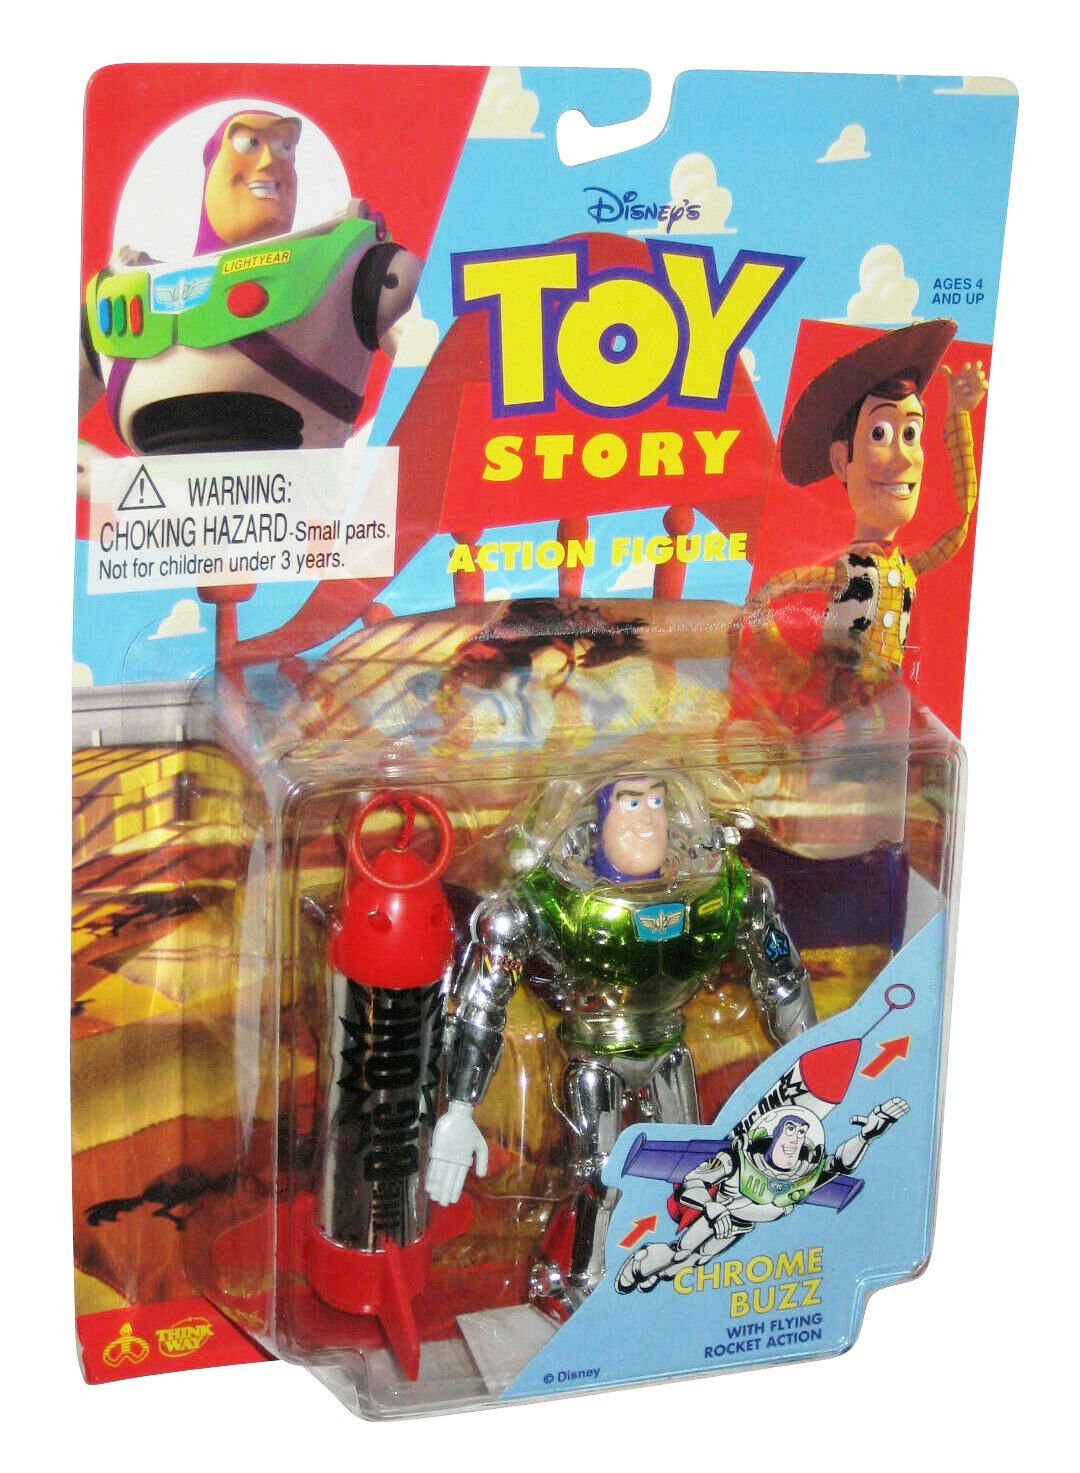 Disney's Toy Story Buzz Lightyear Flying Rocket Action 1995 1st Edition for sale online